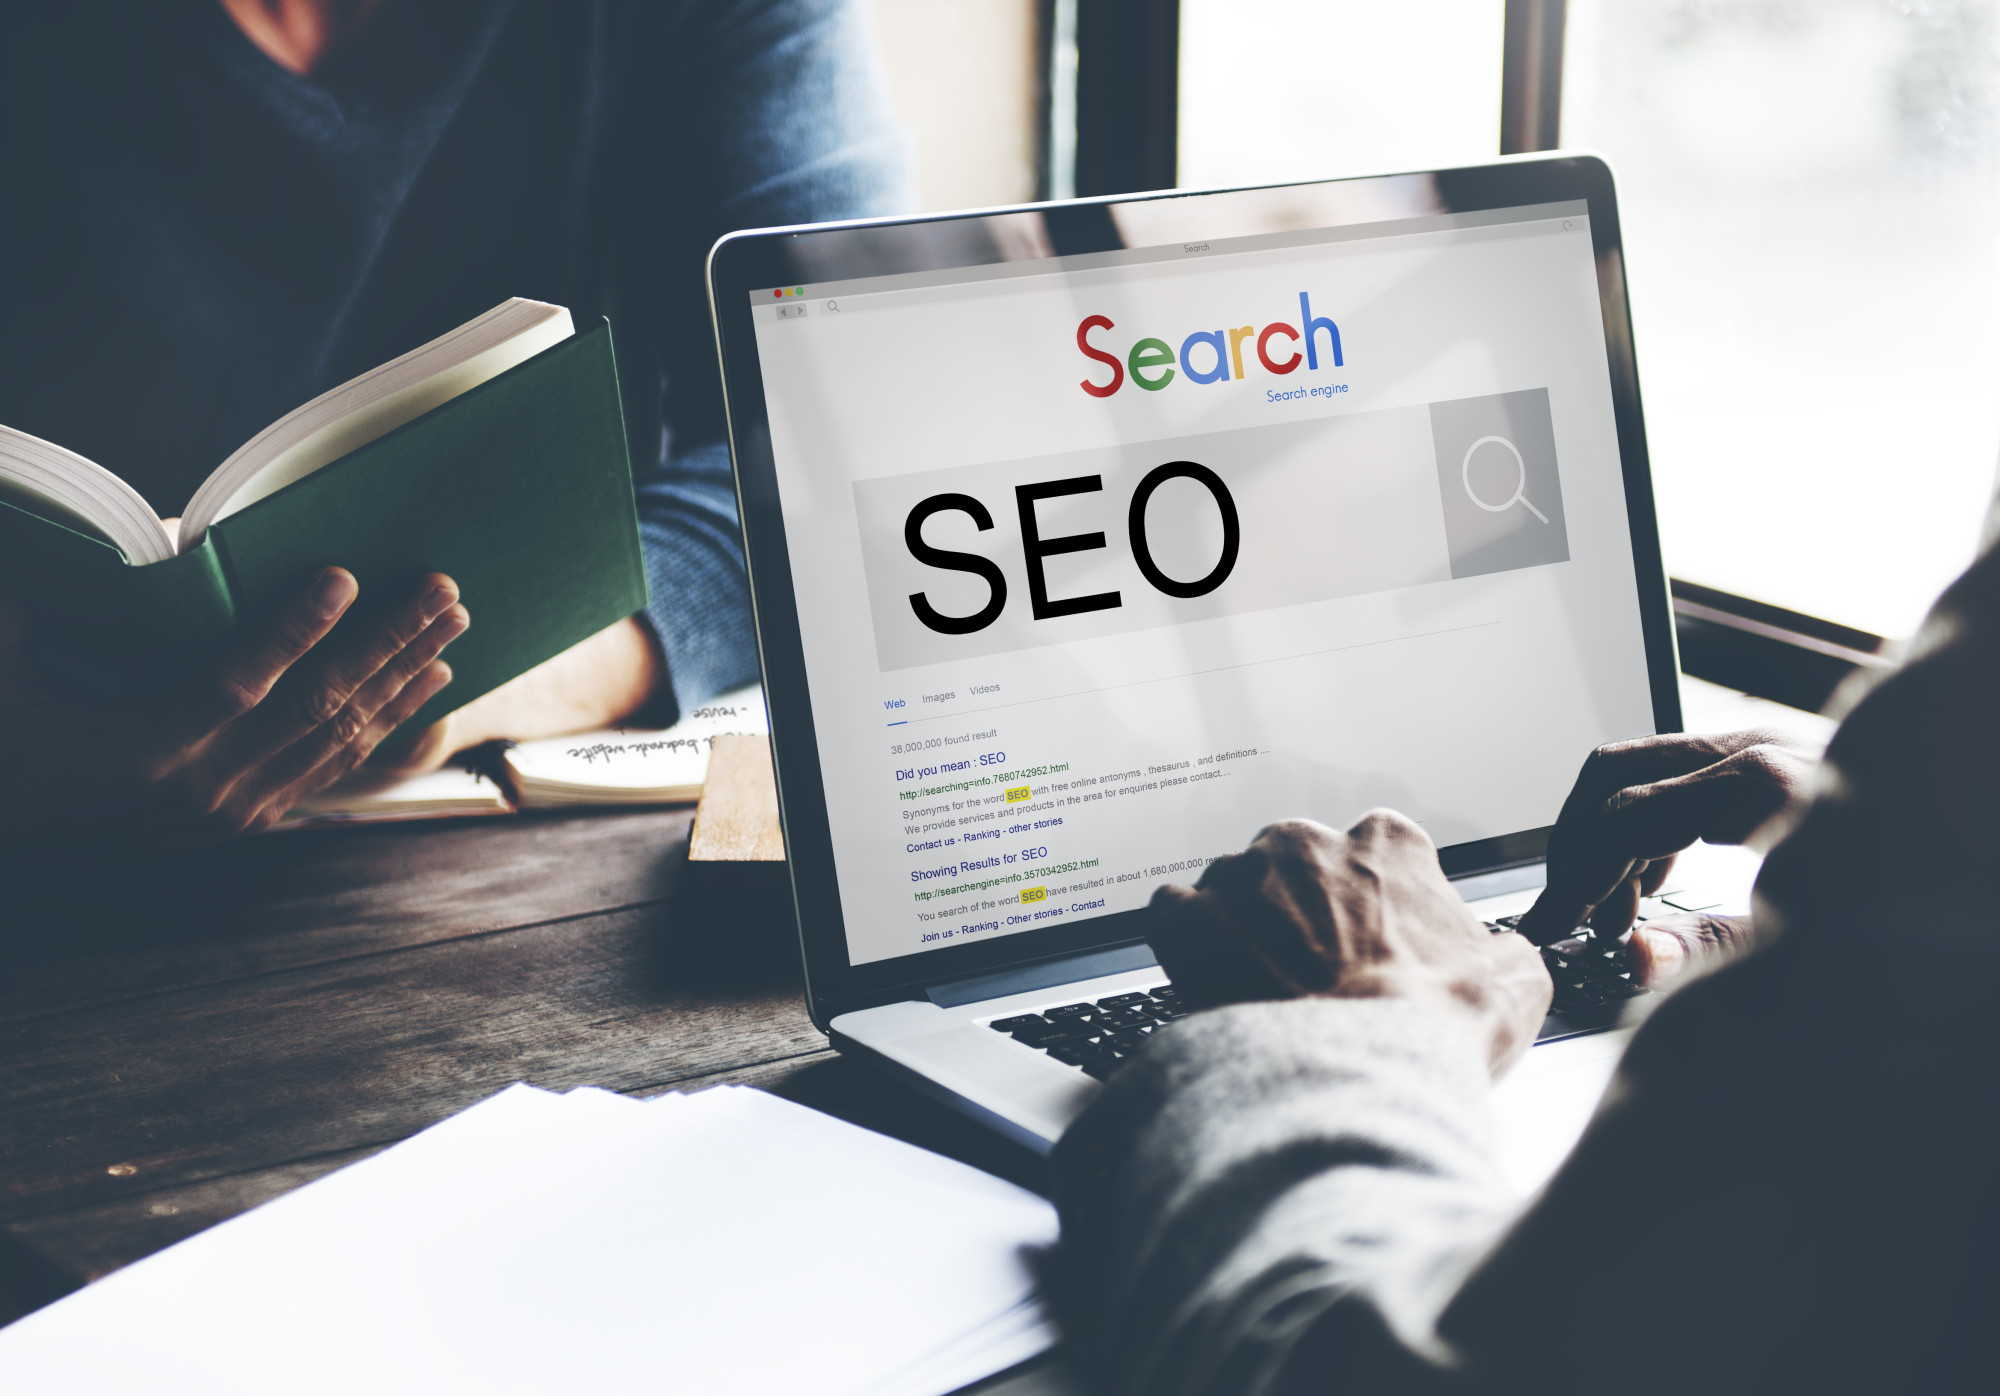 5 Easy Ways to Improve Your Connecticut SEO Ranking